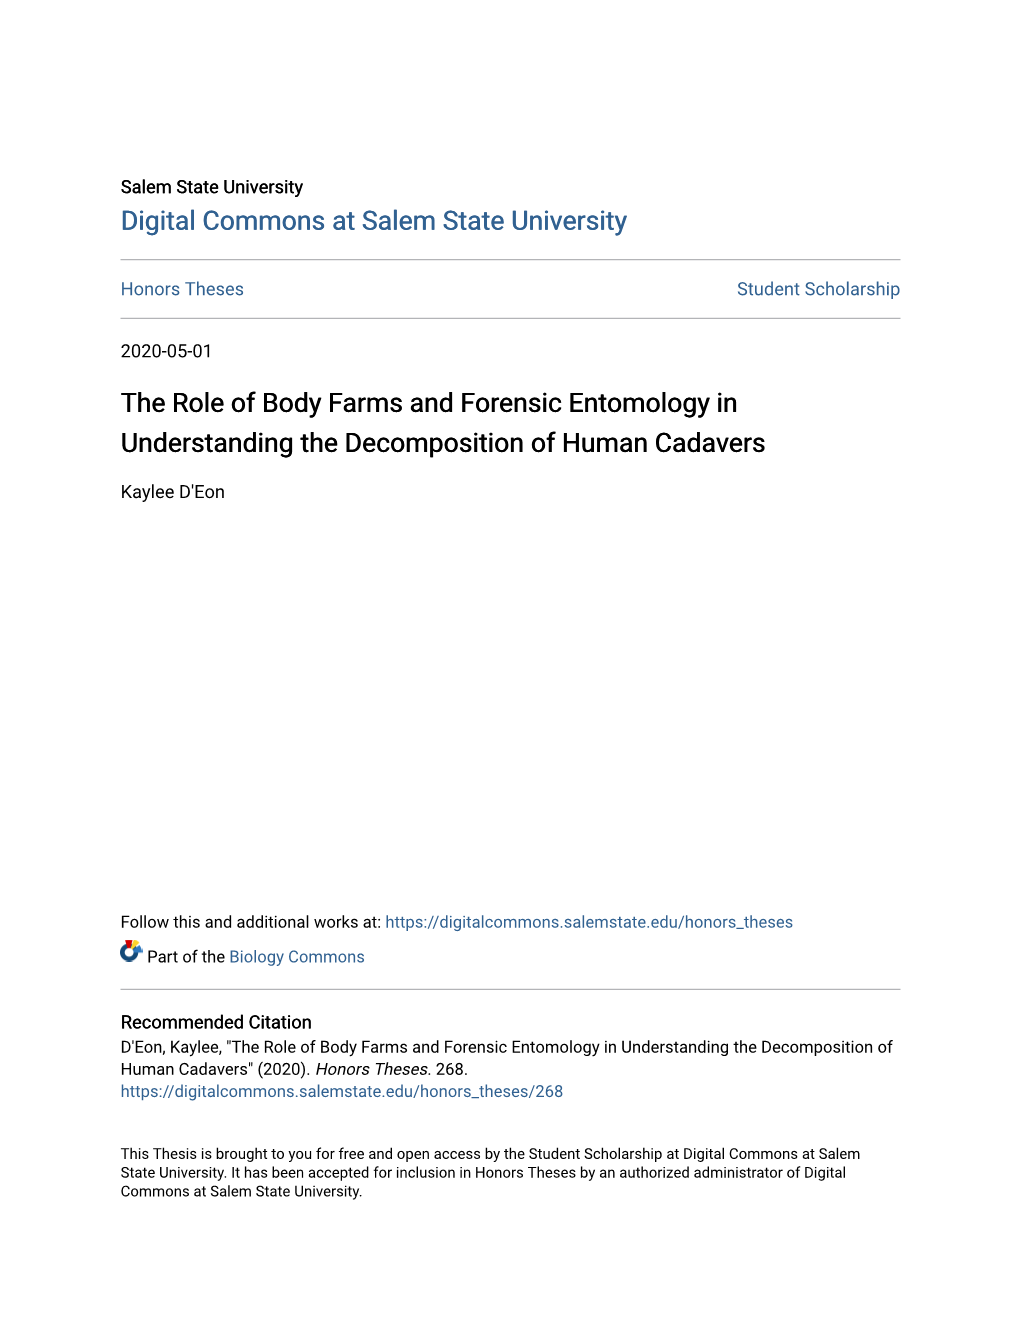 The Role of Body Farms and Forensic Entomology in Understanding the Decomposition of Human Cadavers